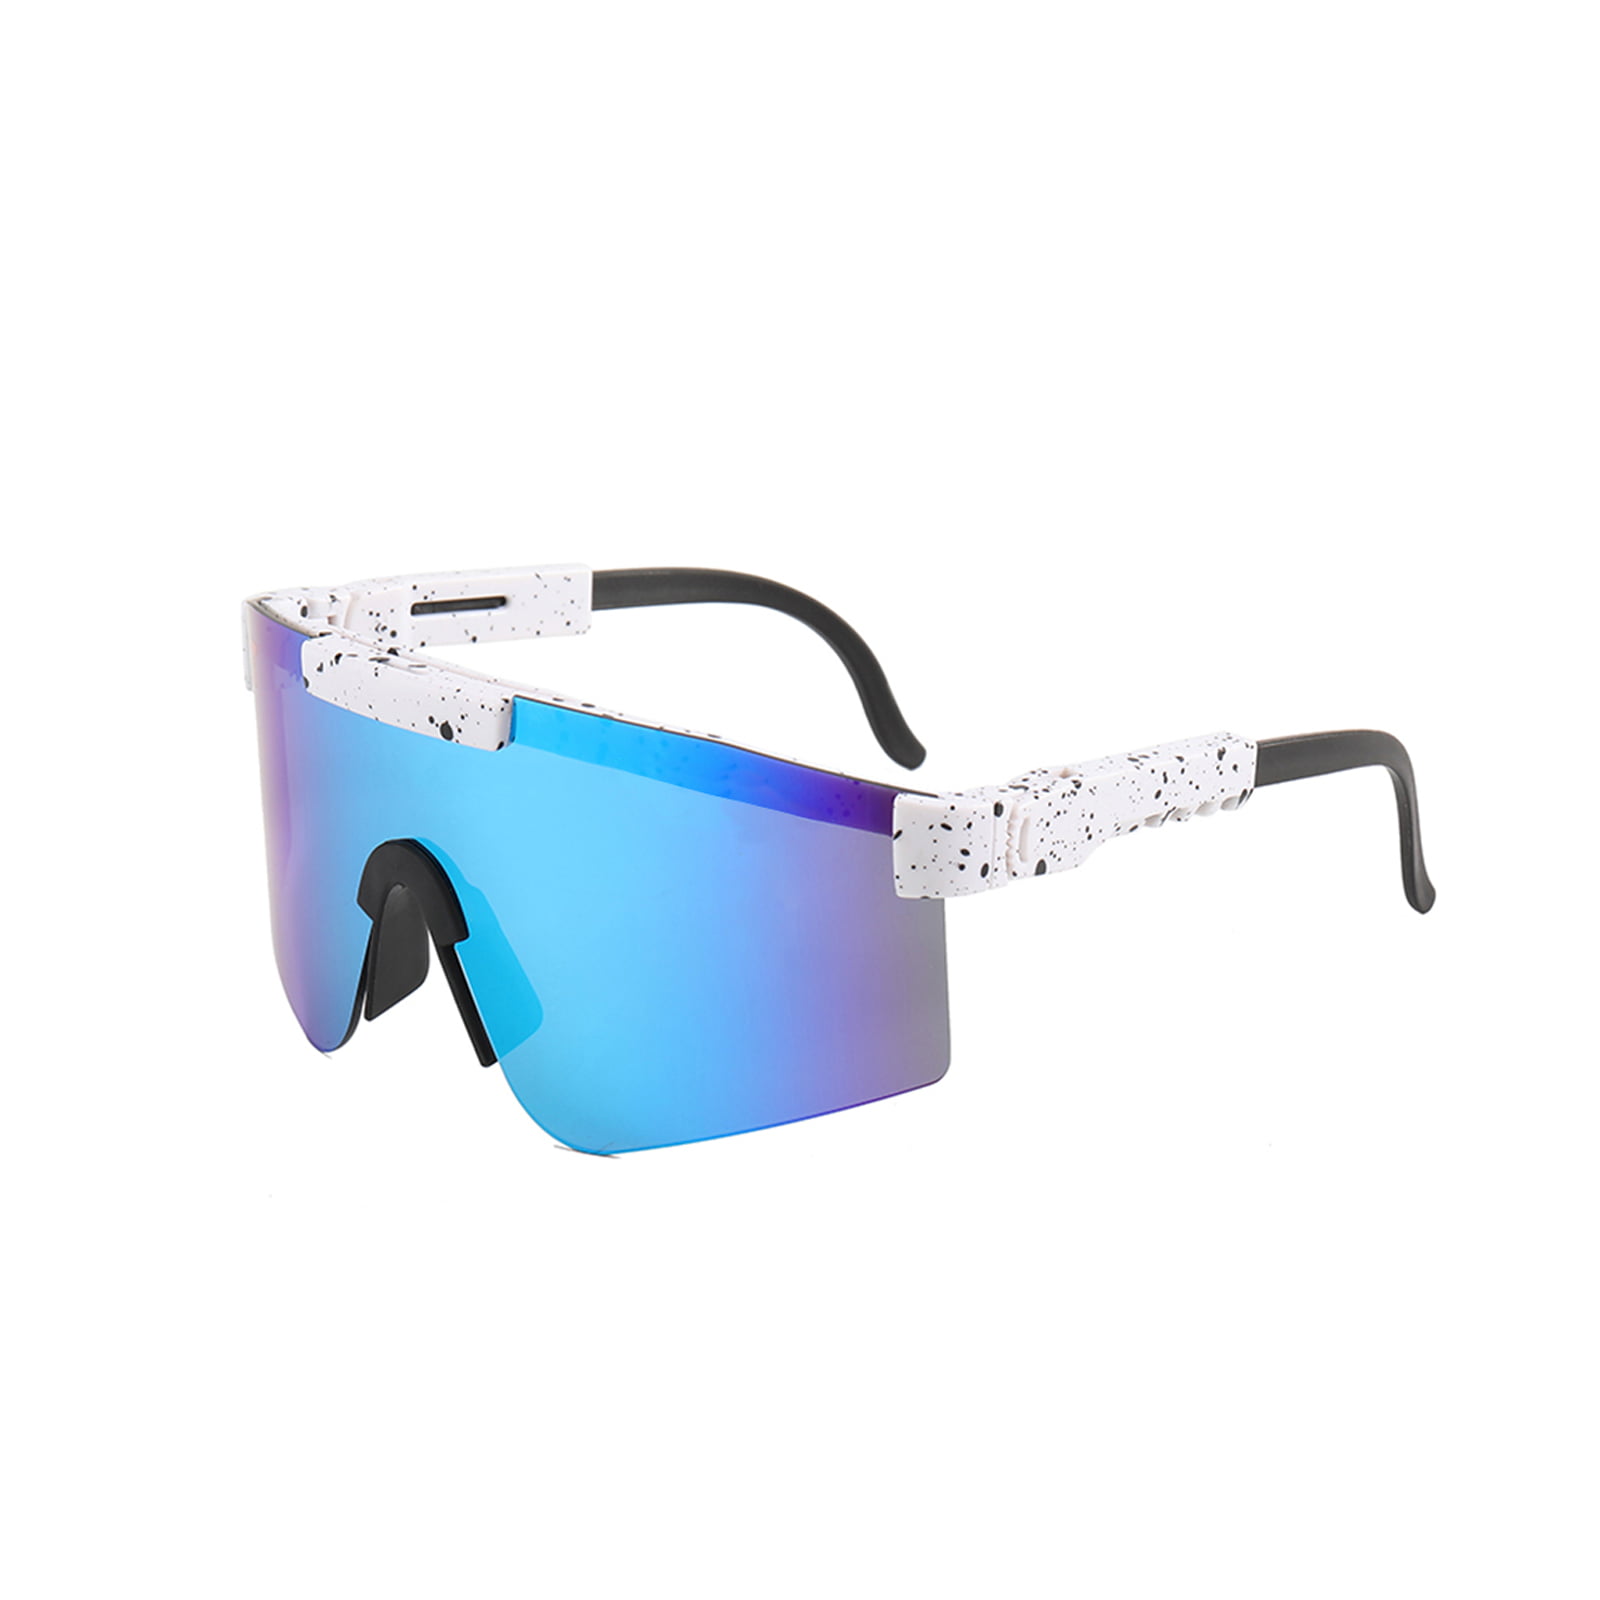 Pit-Viper Uv400 Viper Sunglasses for Men and Women Polarized Glasses Outdoor Cycling-C10 